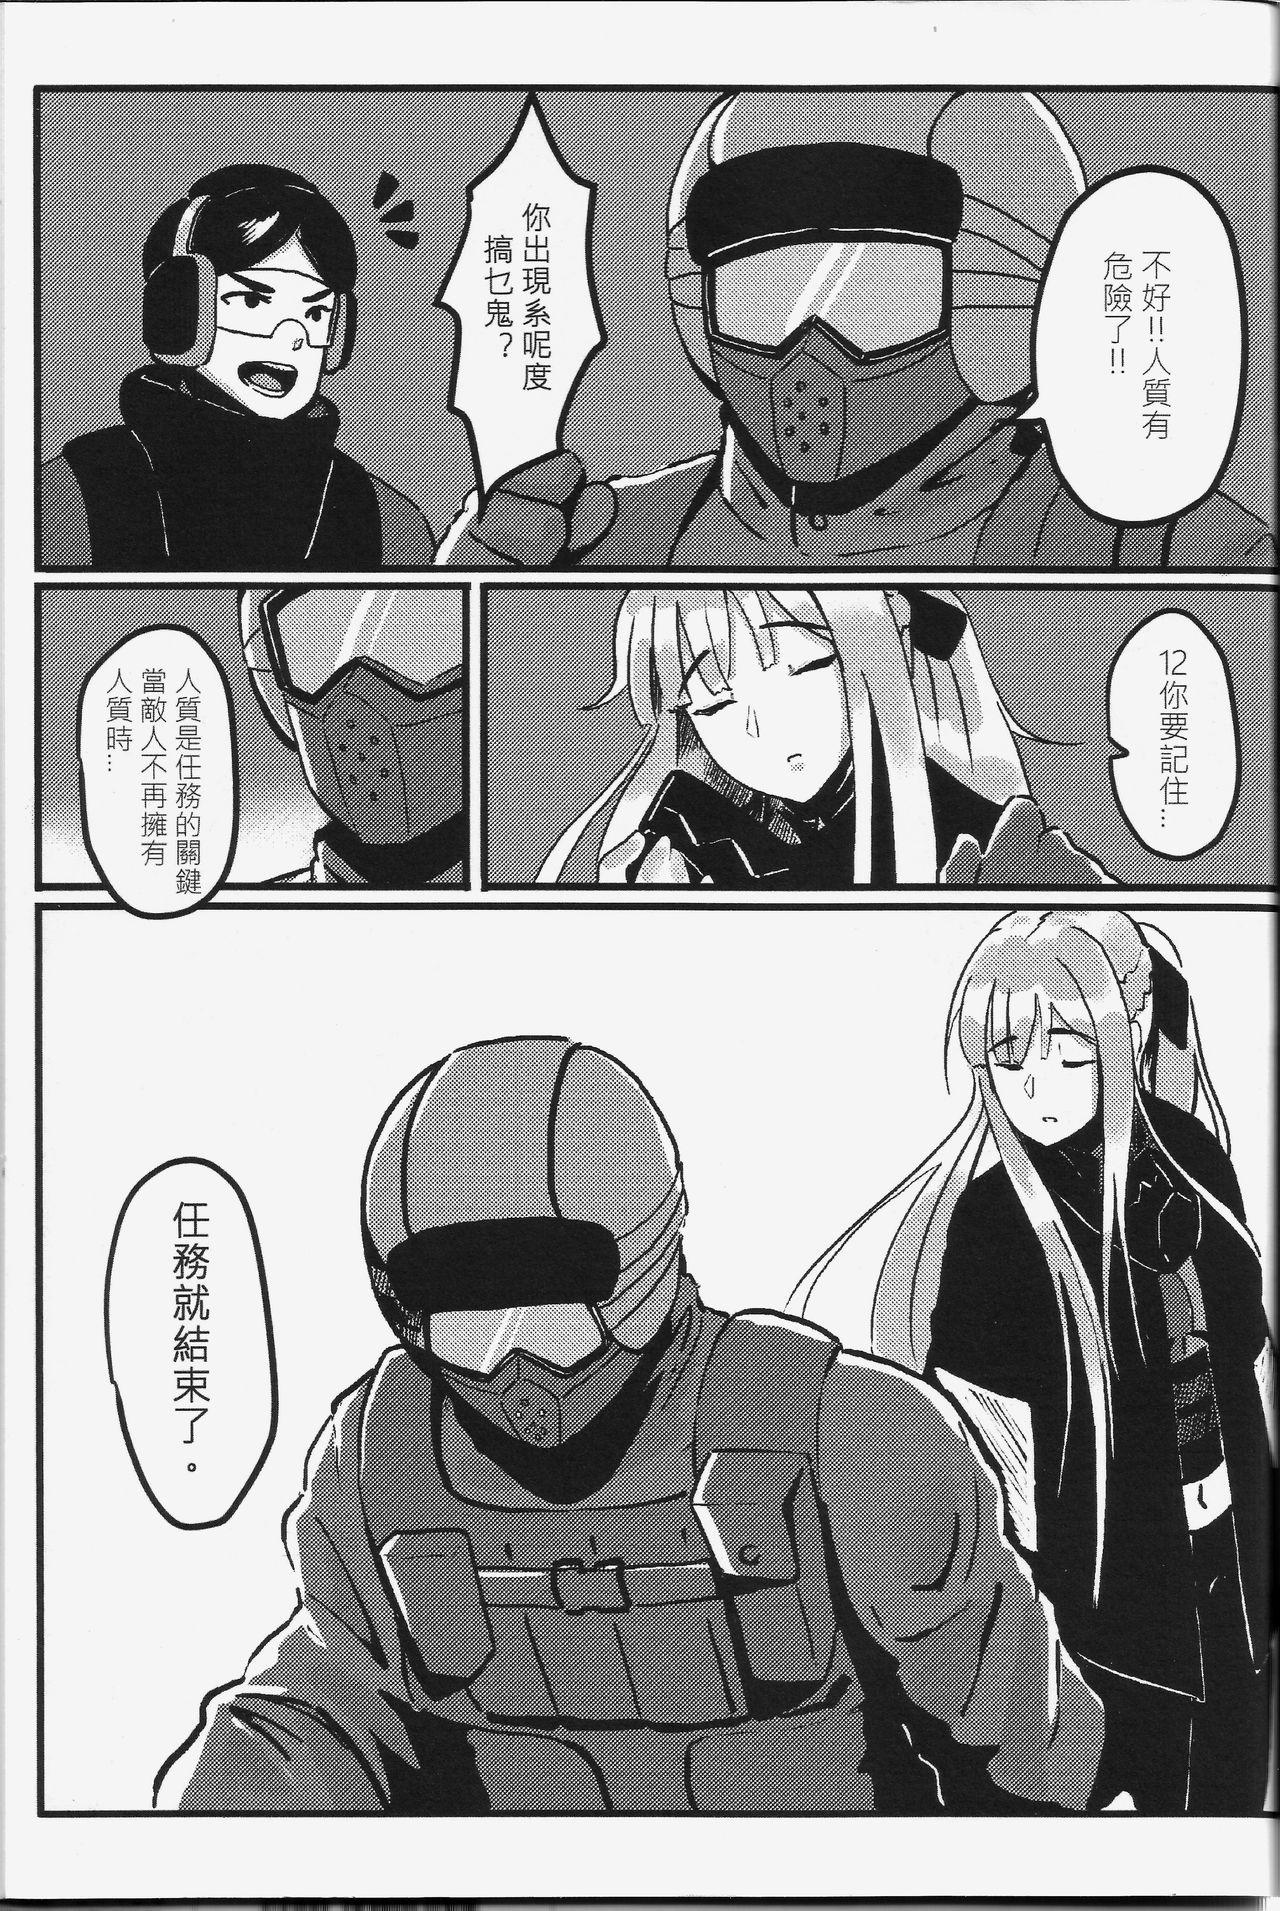 Porn Amateur [FF32][幻獸麒麟] RAINBOW SEX/Girl's Frontline(Girl's Frontline) 恐怖蟑螂公個人分享 - Girls frontline Thick - Page 6